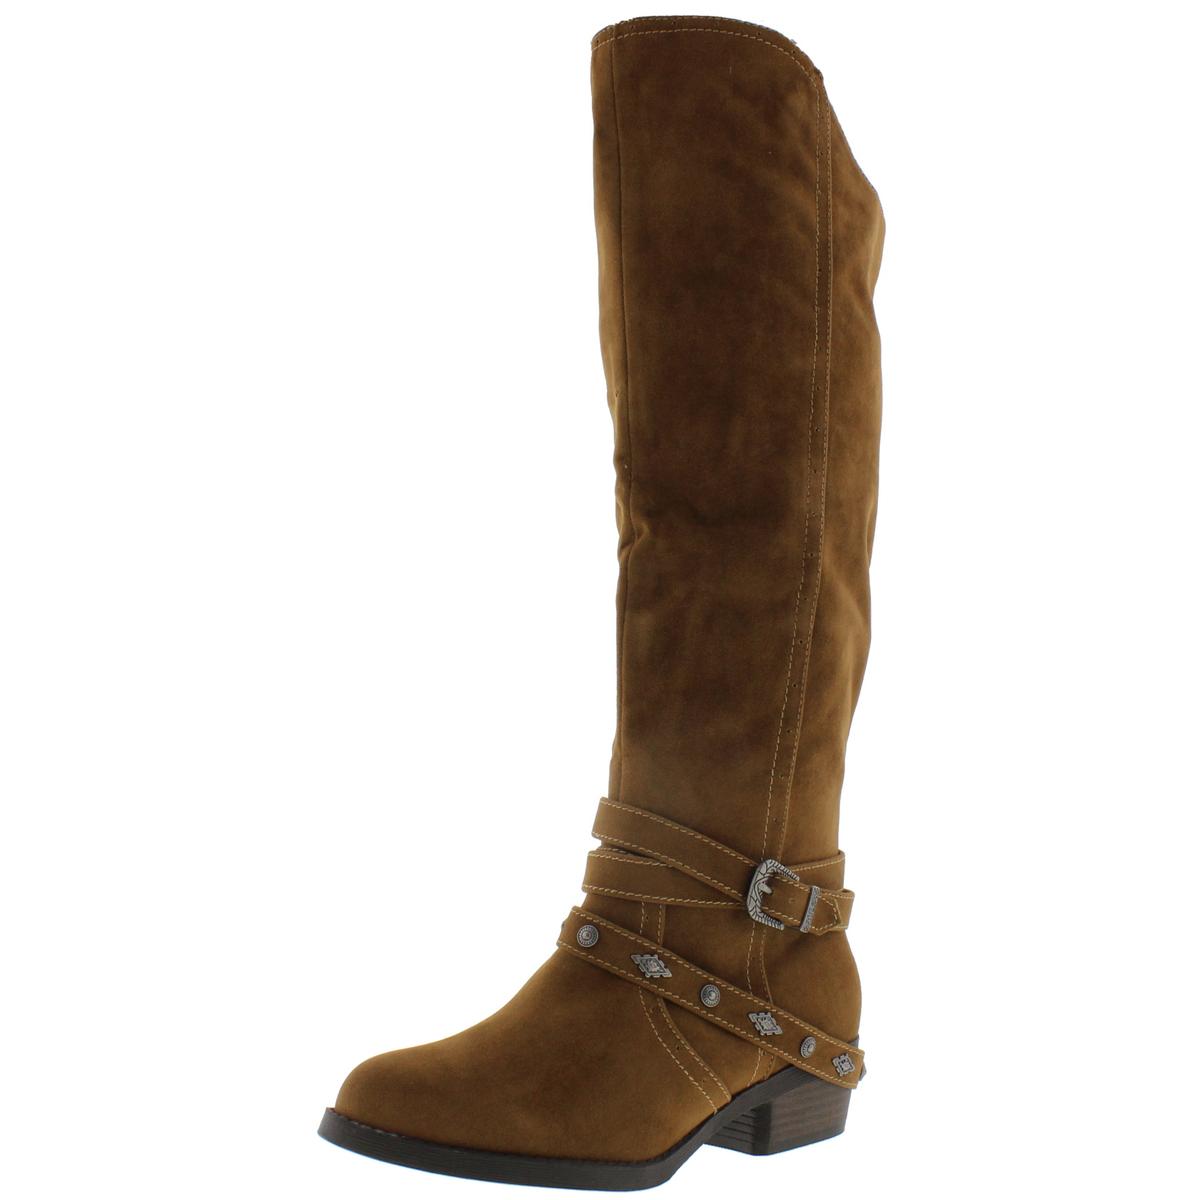 Jellypop 1063 Womens Ridge Faux Suede Buckle Knee-High Riding Boots ...